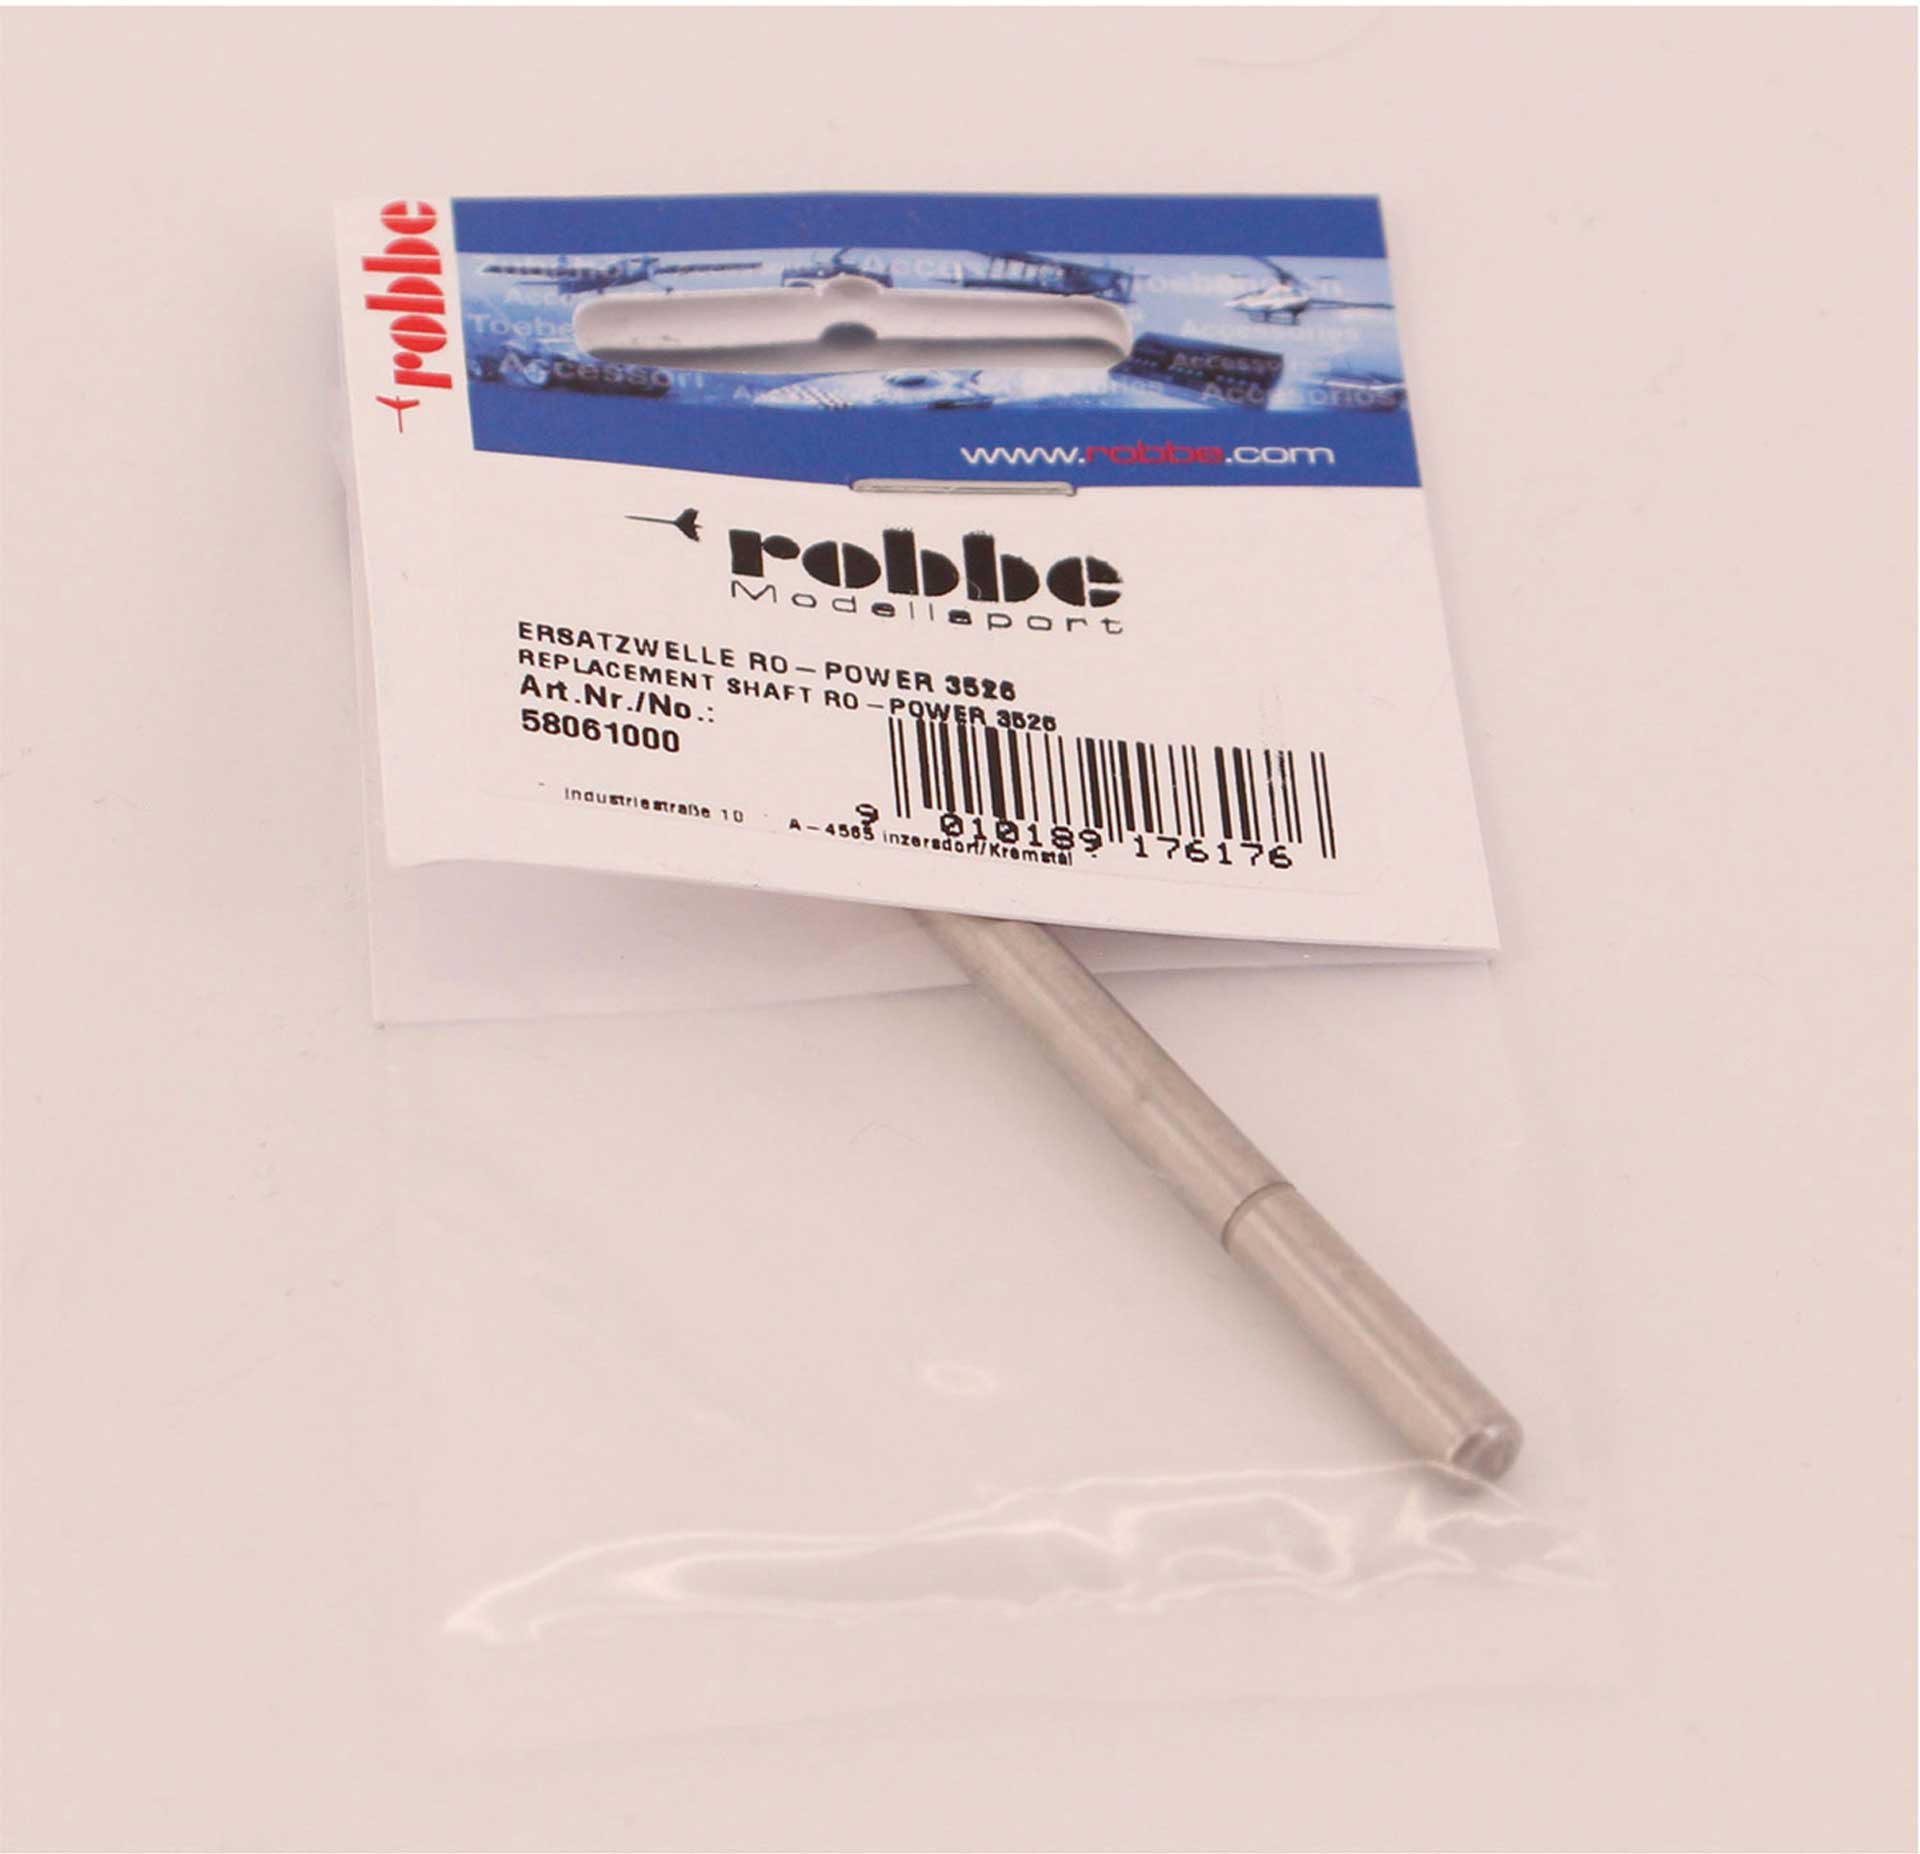 Robbe Modellsport REPLACEMENT SHAFT RO-POWER 3526